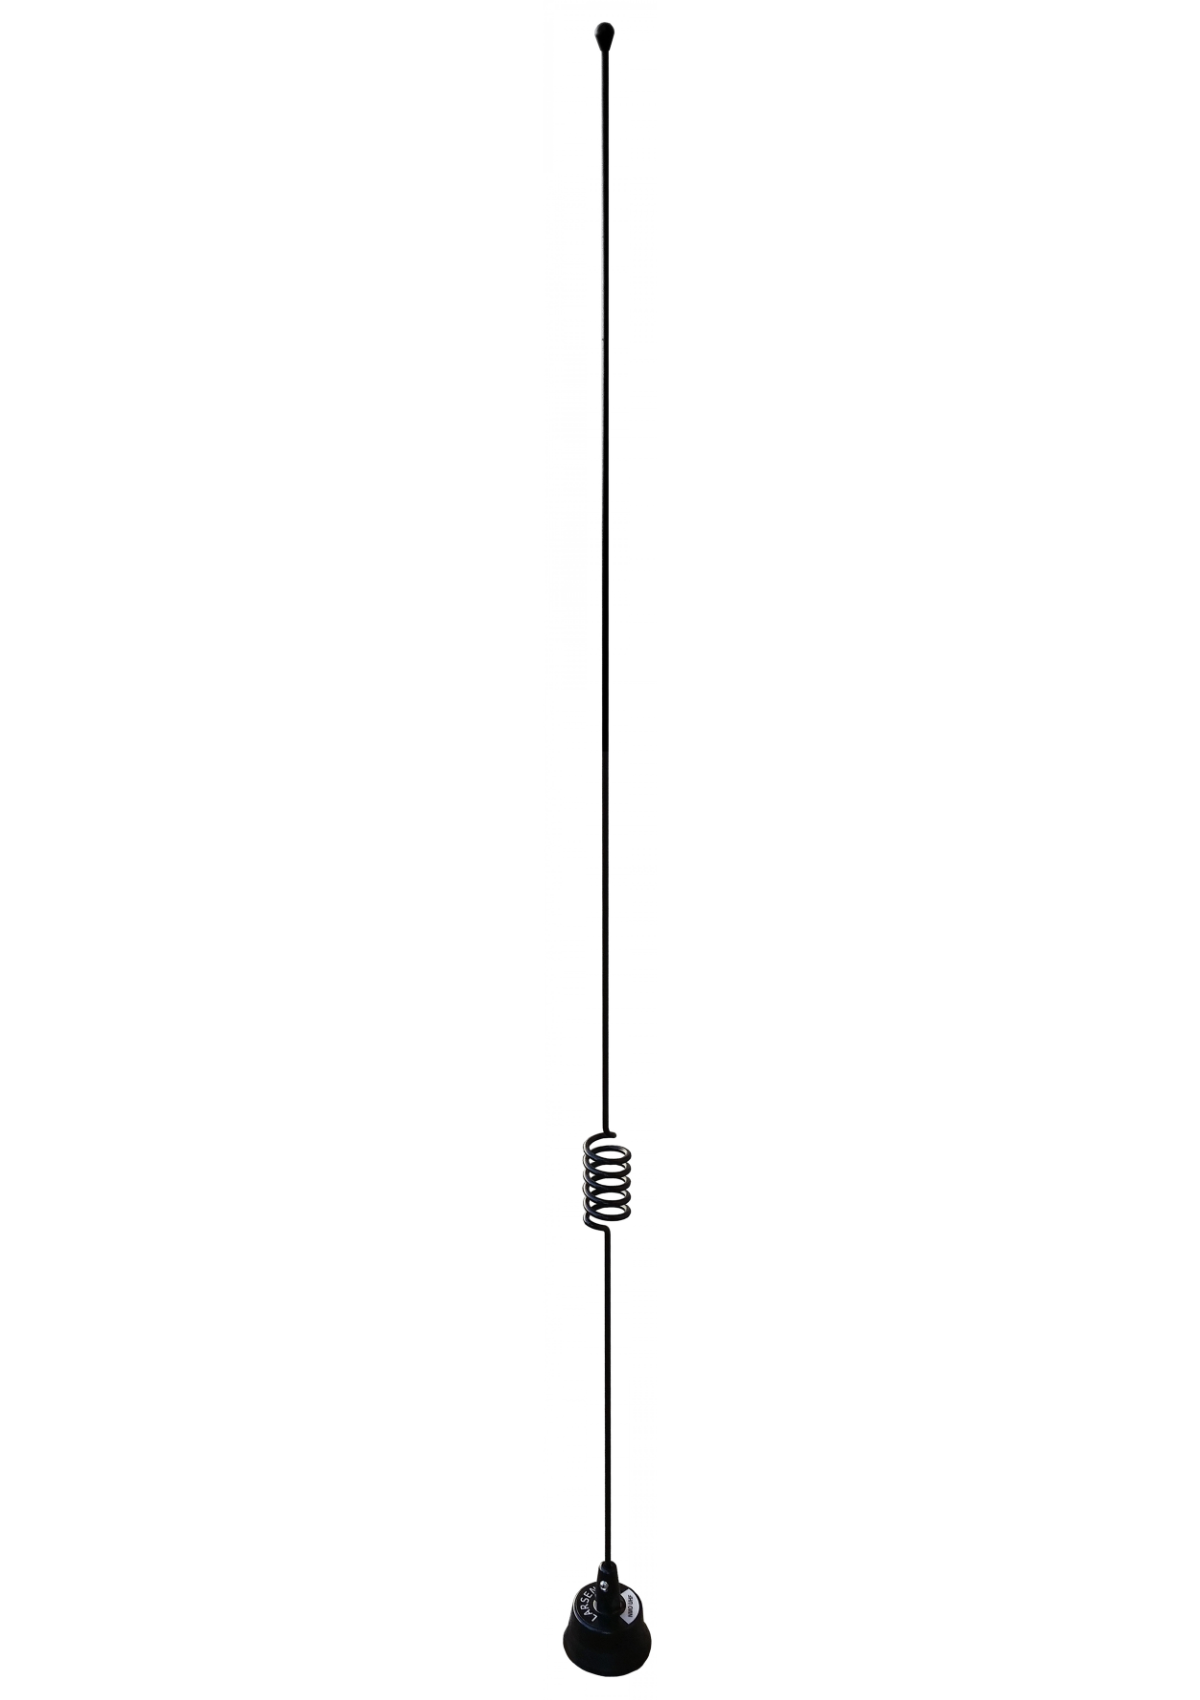 Pulse Larsen LM450C UHF 450-470 Mhz Whip Antenna and Base Coil - Stainless